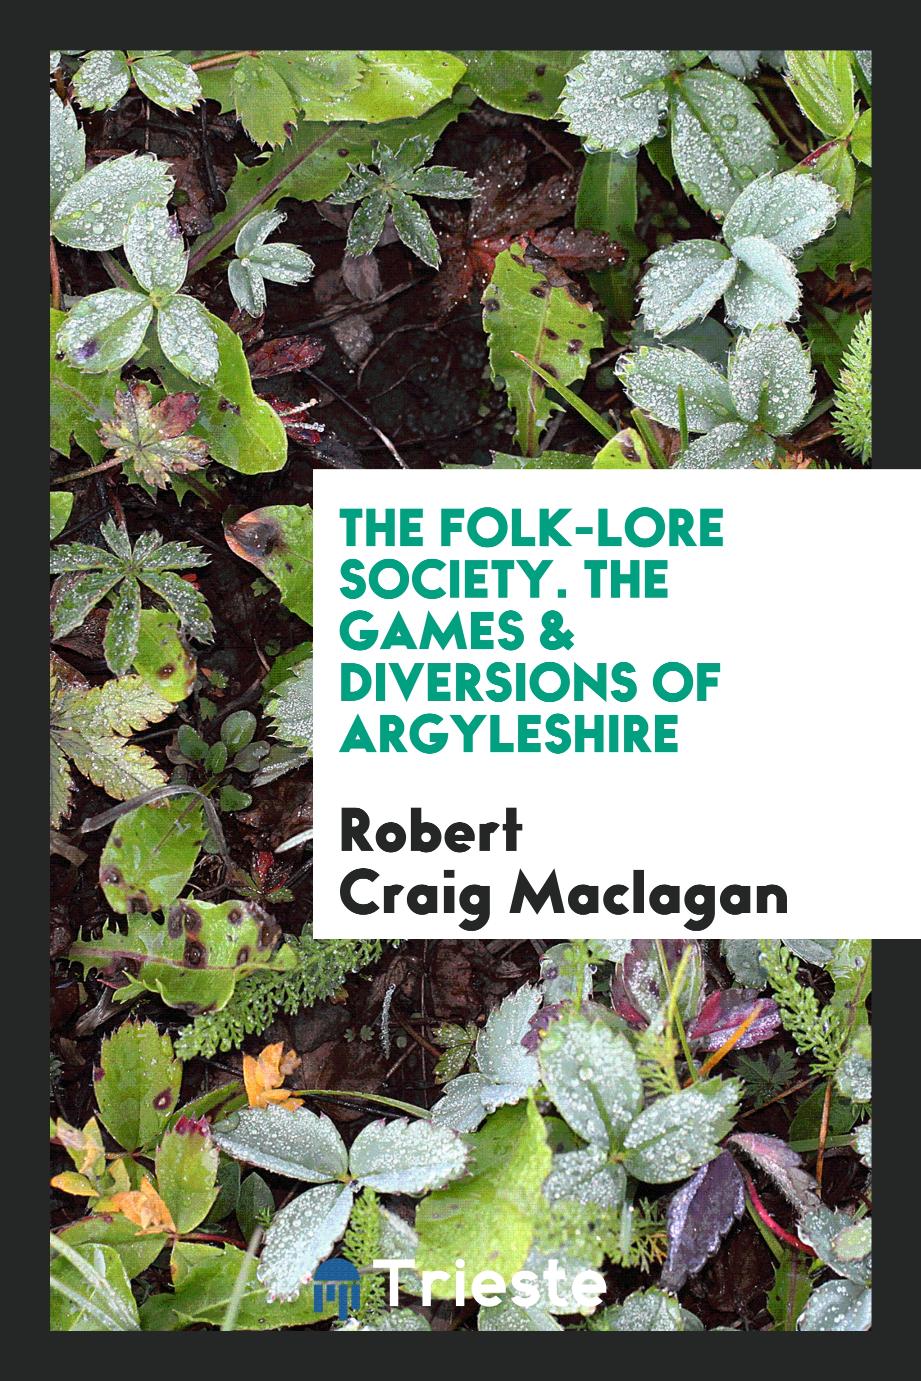 The Folk-Lore Society. The Games & Diversions of Argyleshire